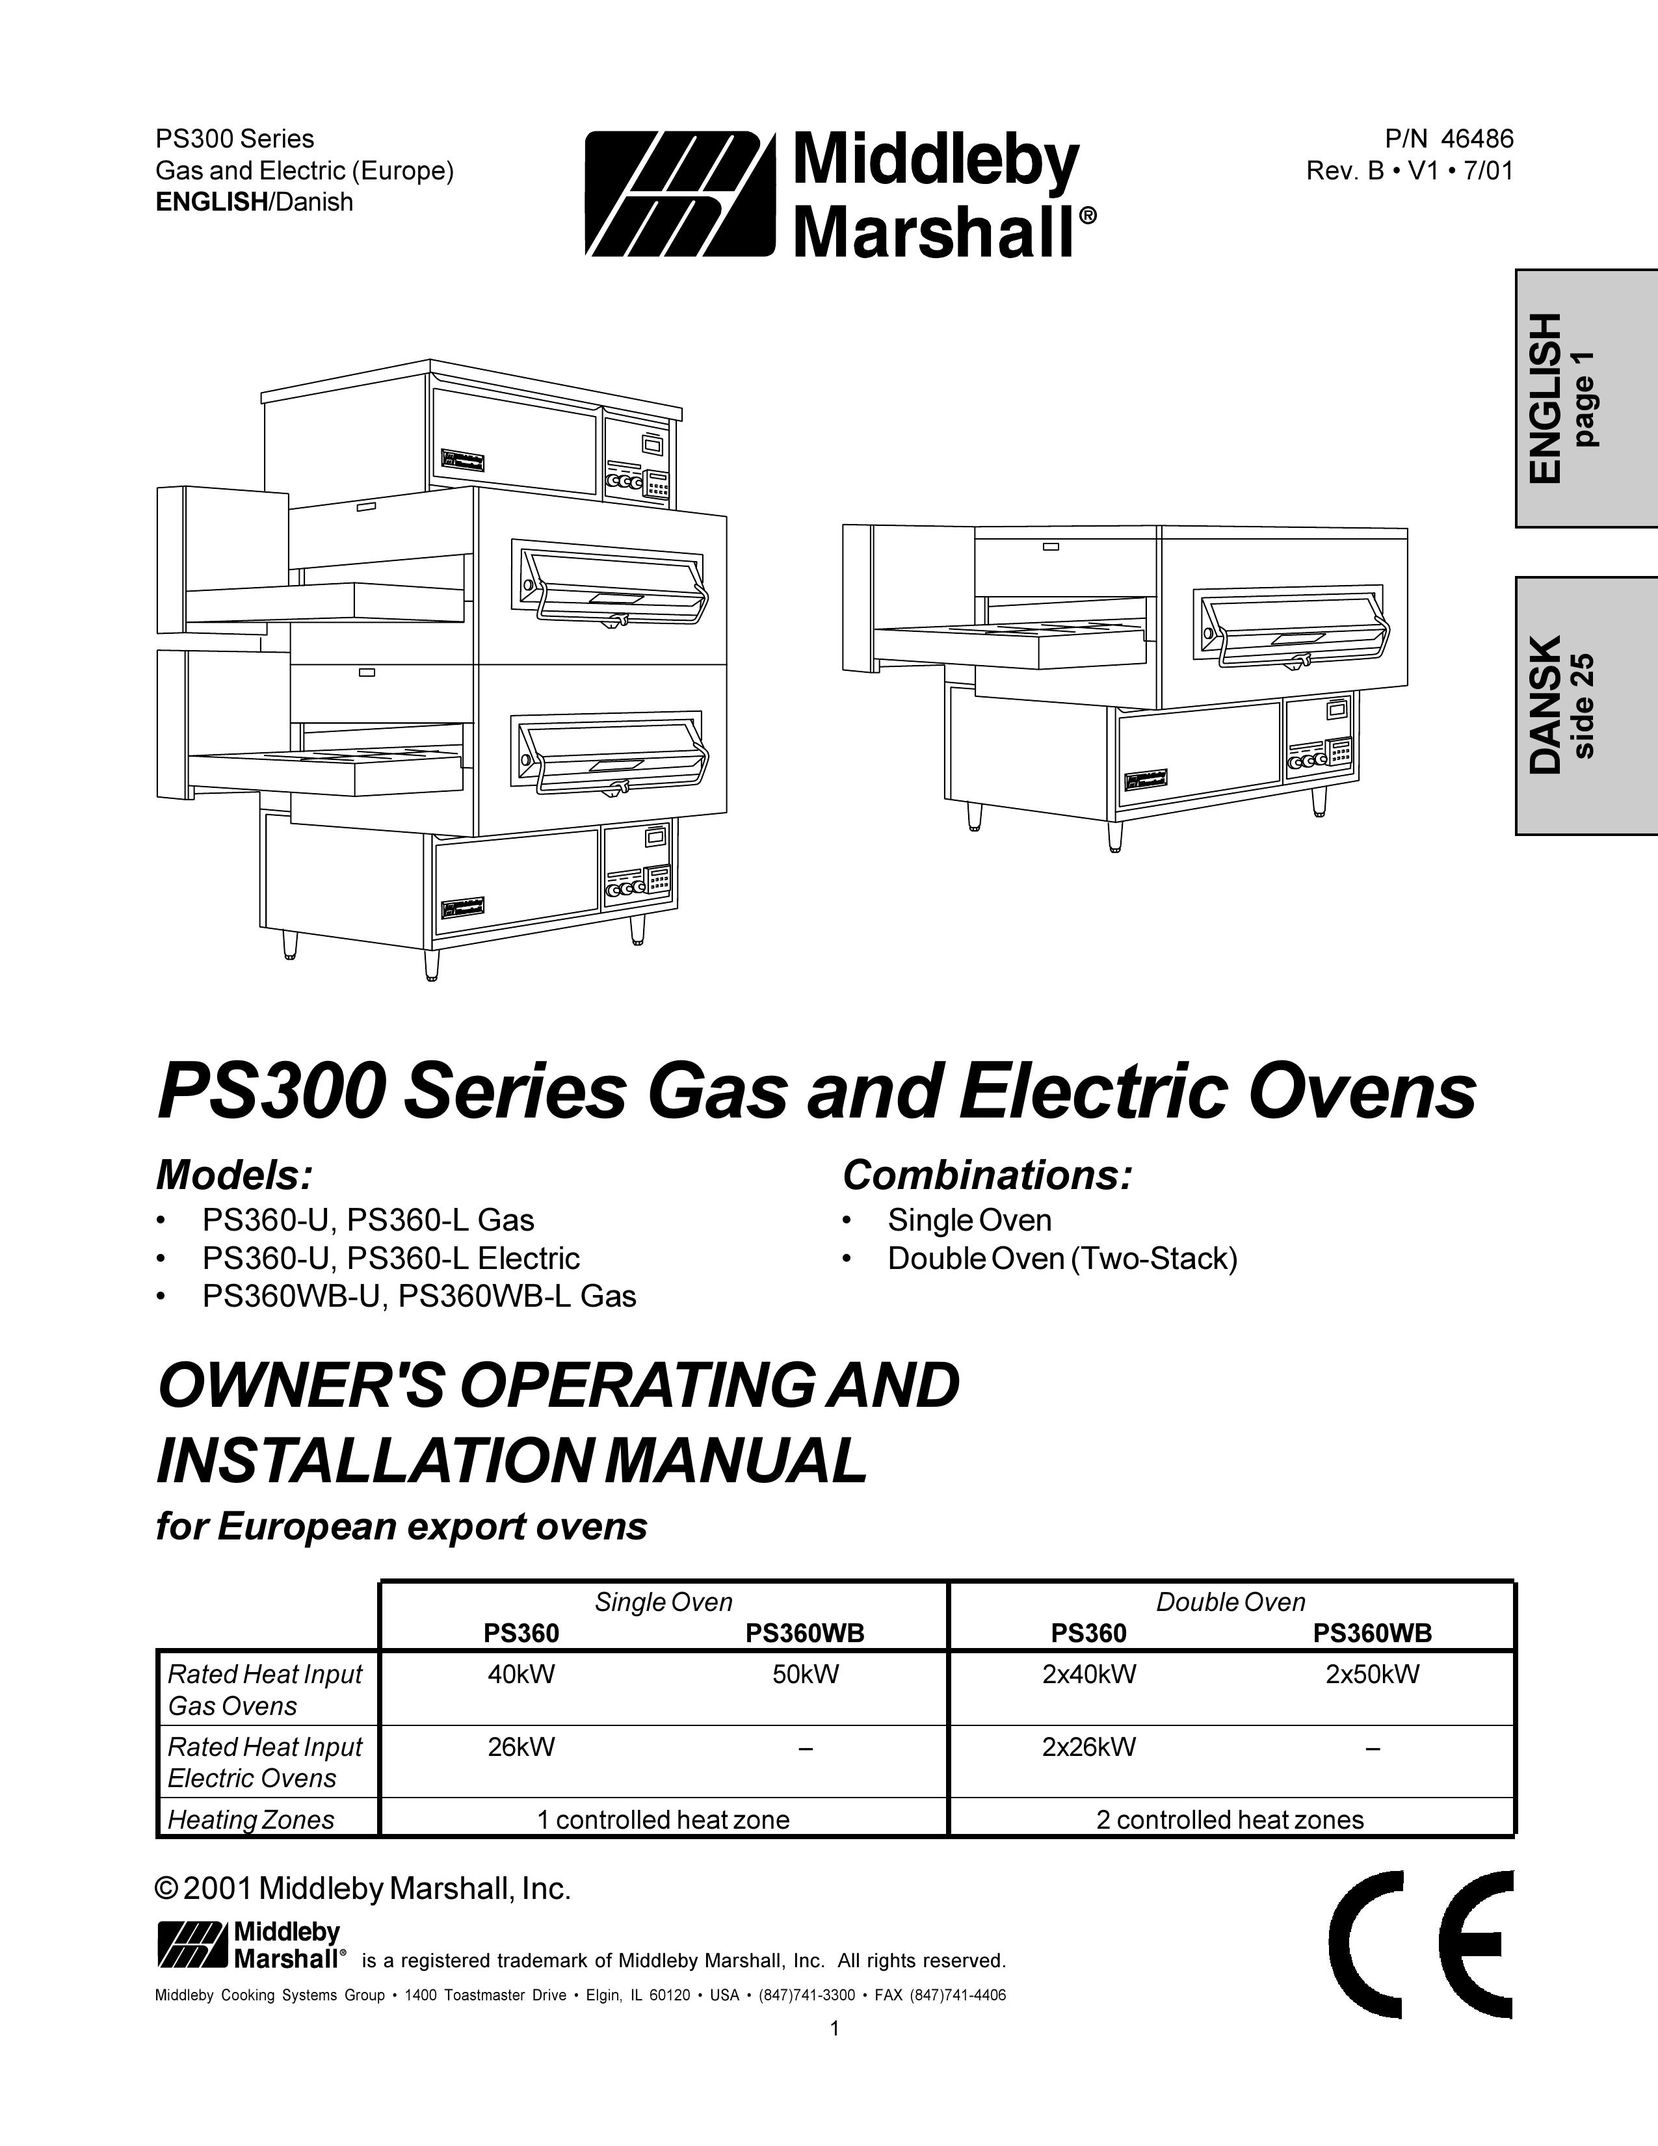 Middleby Marshall PS360-U Convection Oven User Manual